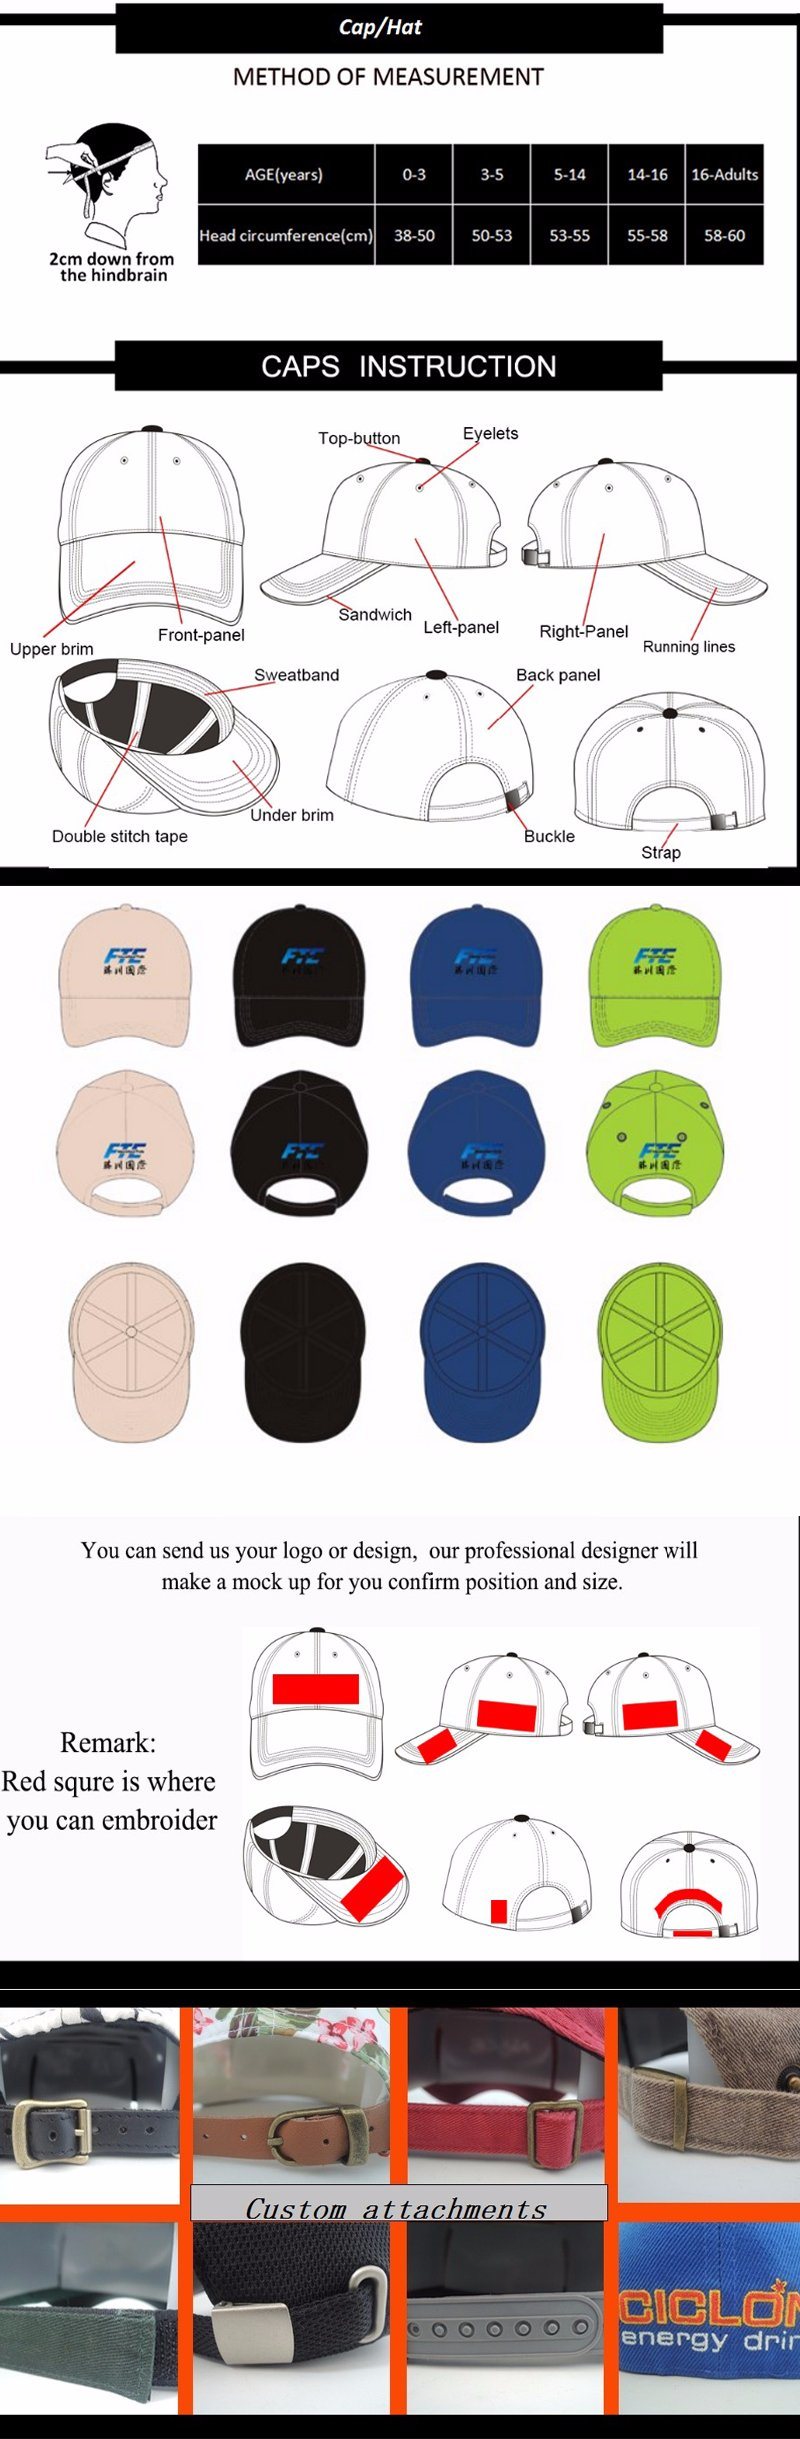 3D Promotion Embroidery Polo Baseball Cap with Metal Buckle